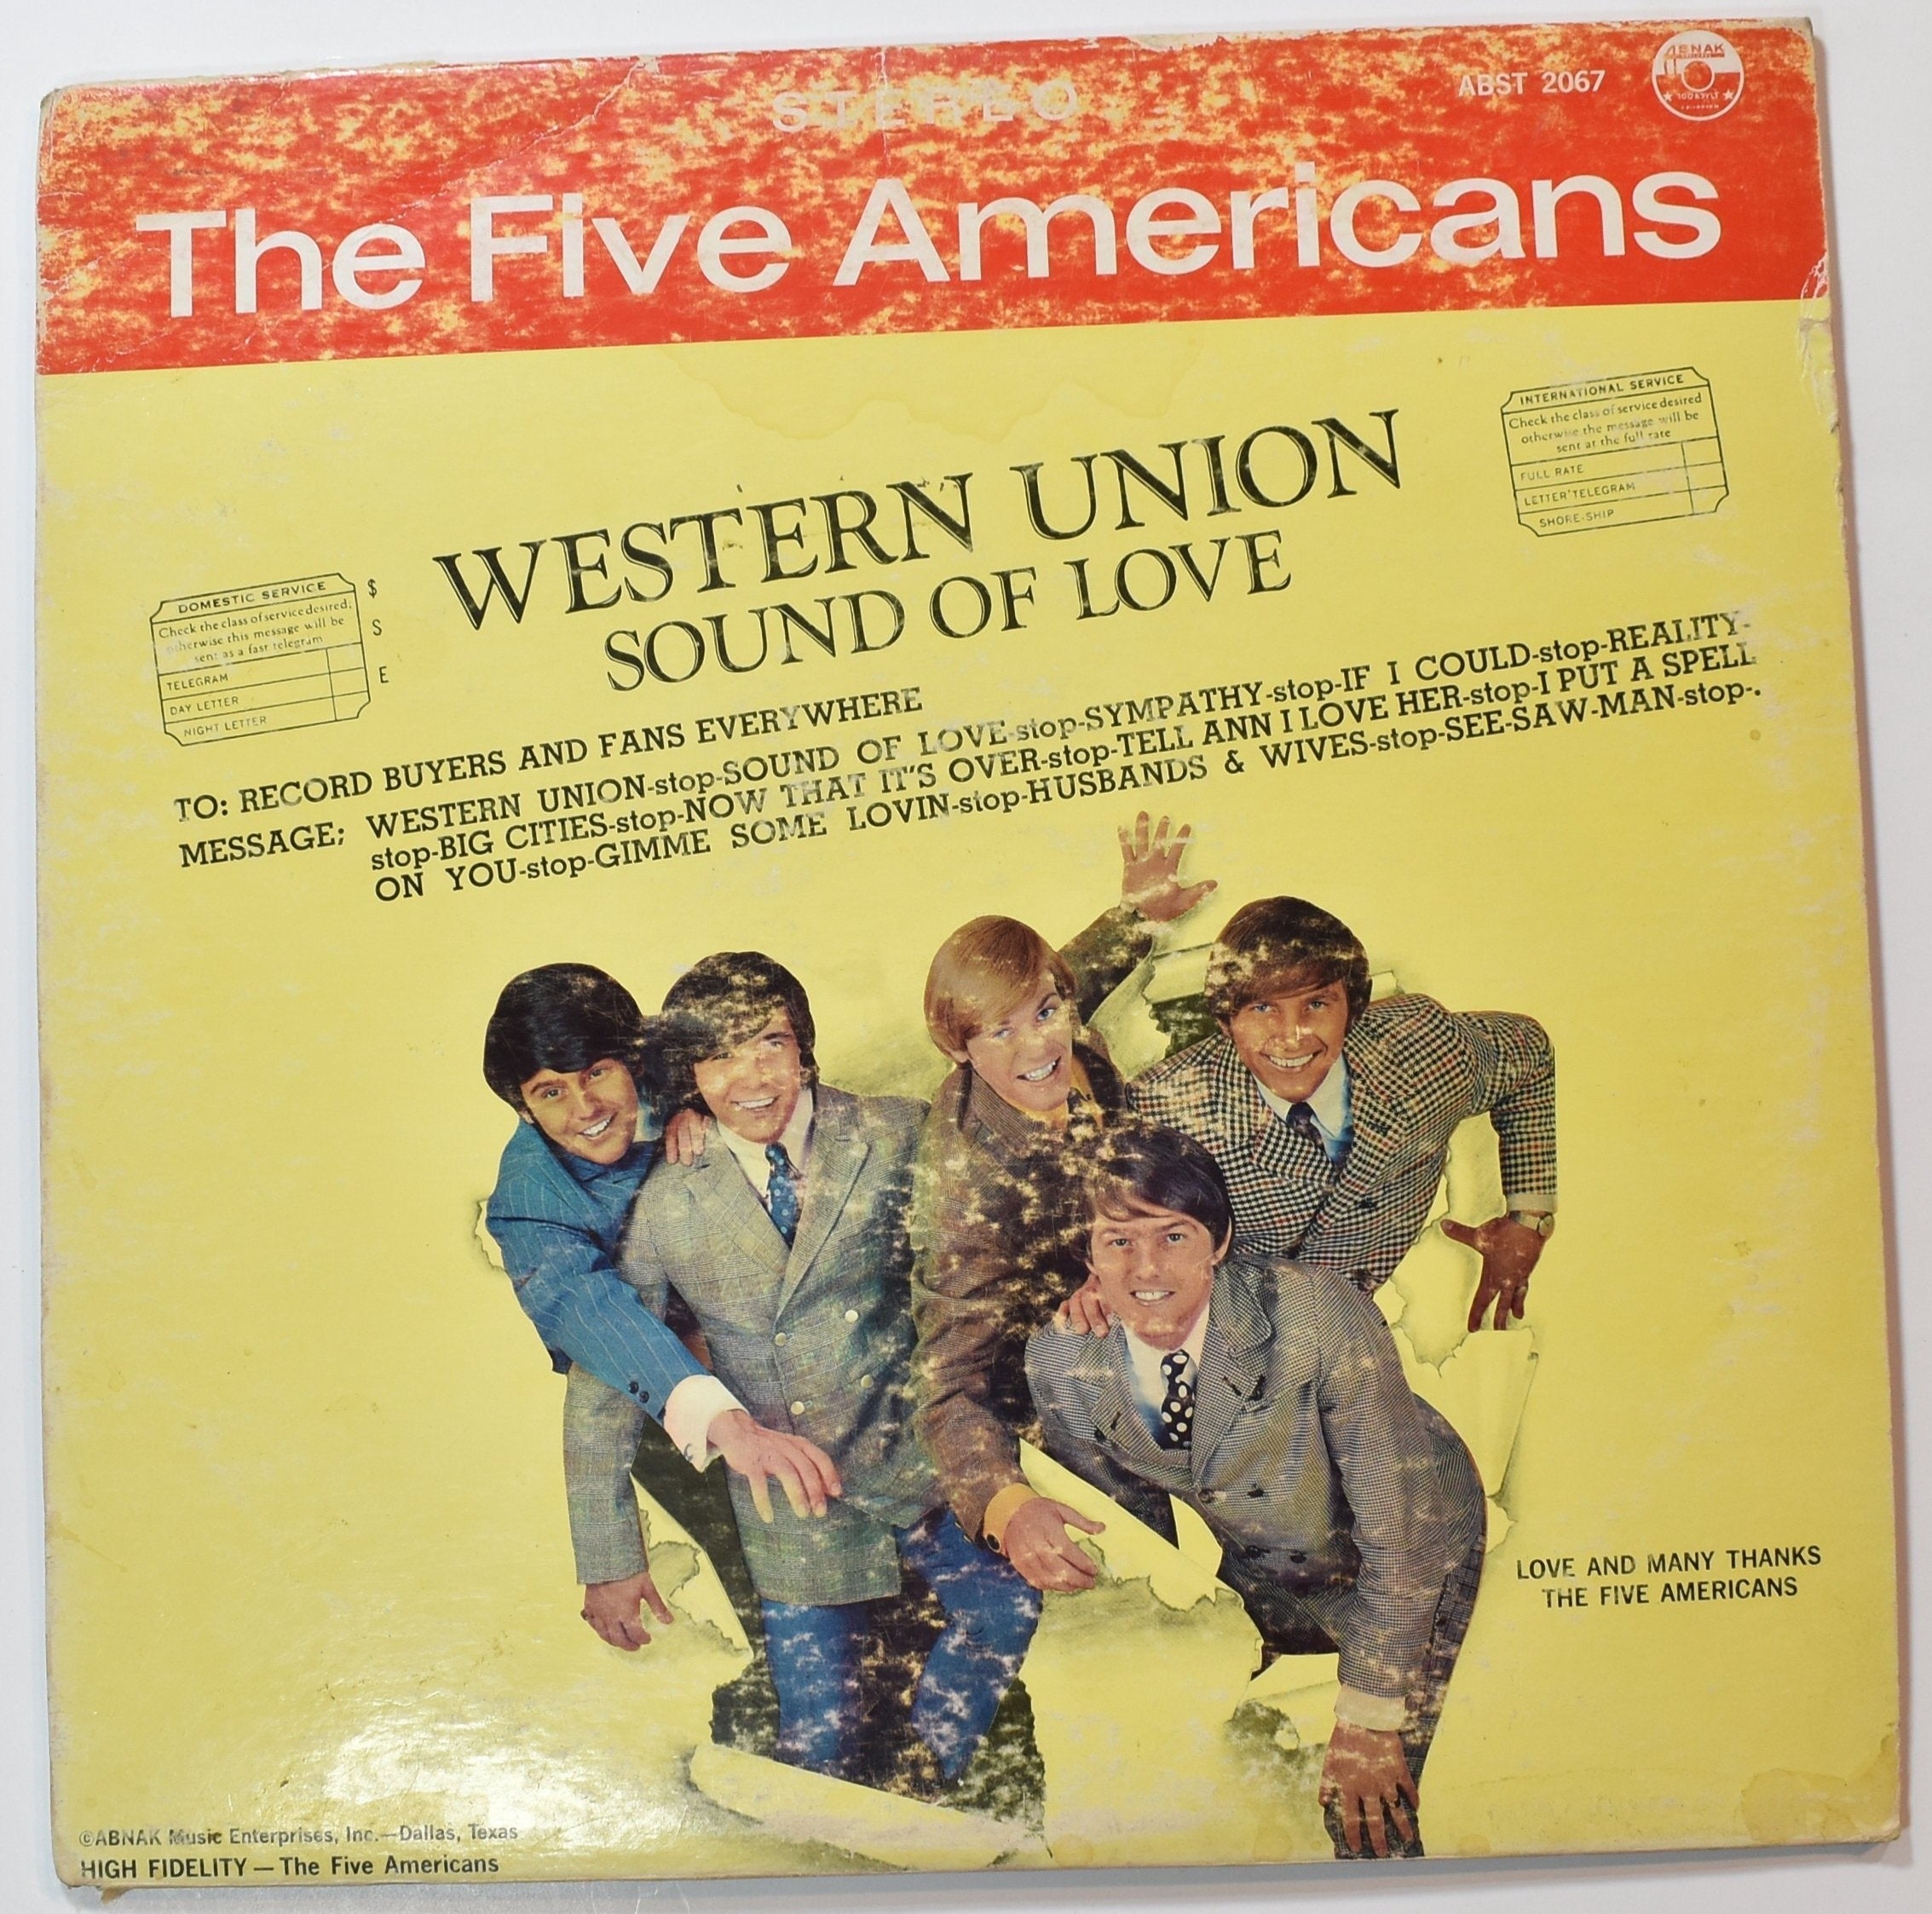 Vinyl Music Record The Five Americans Western Union sound of love record